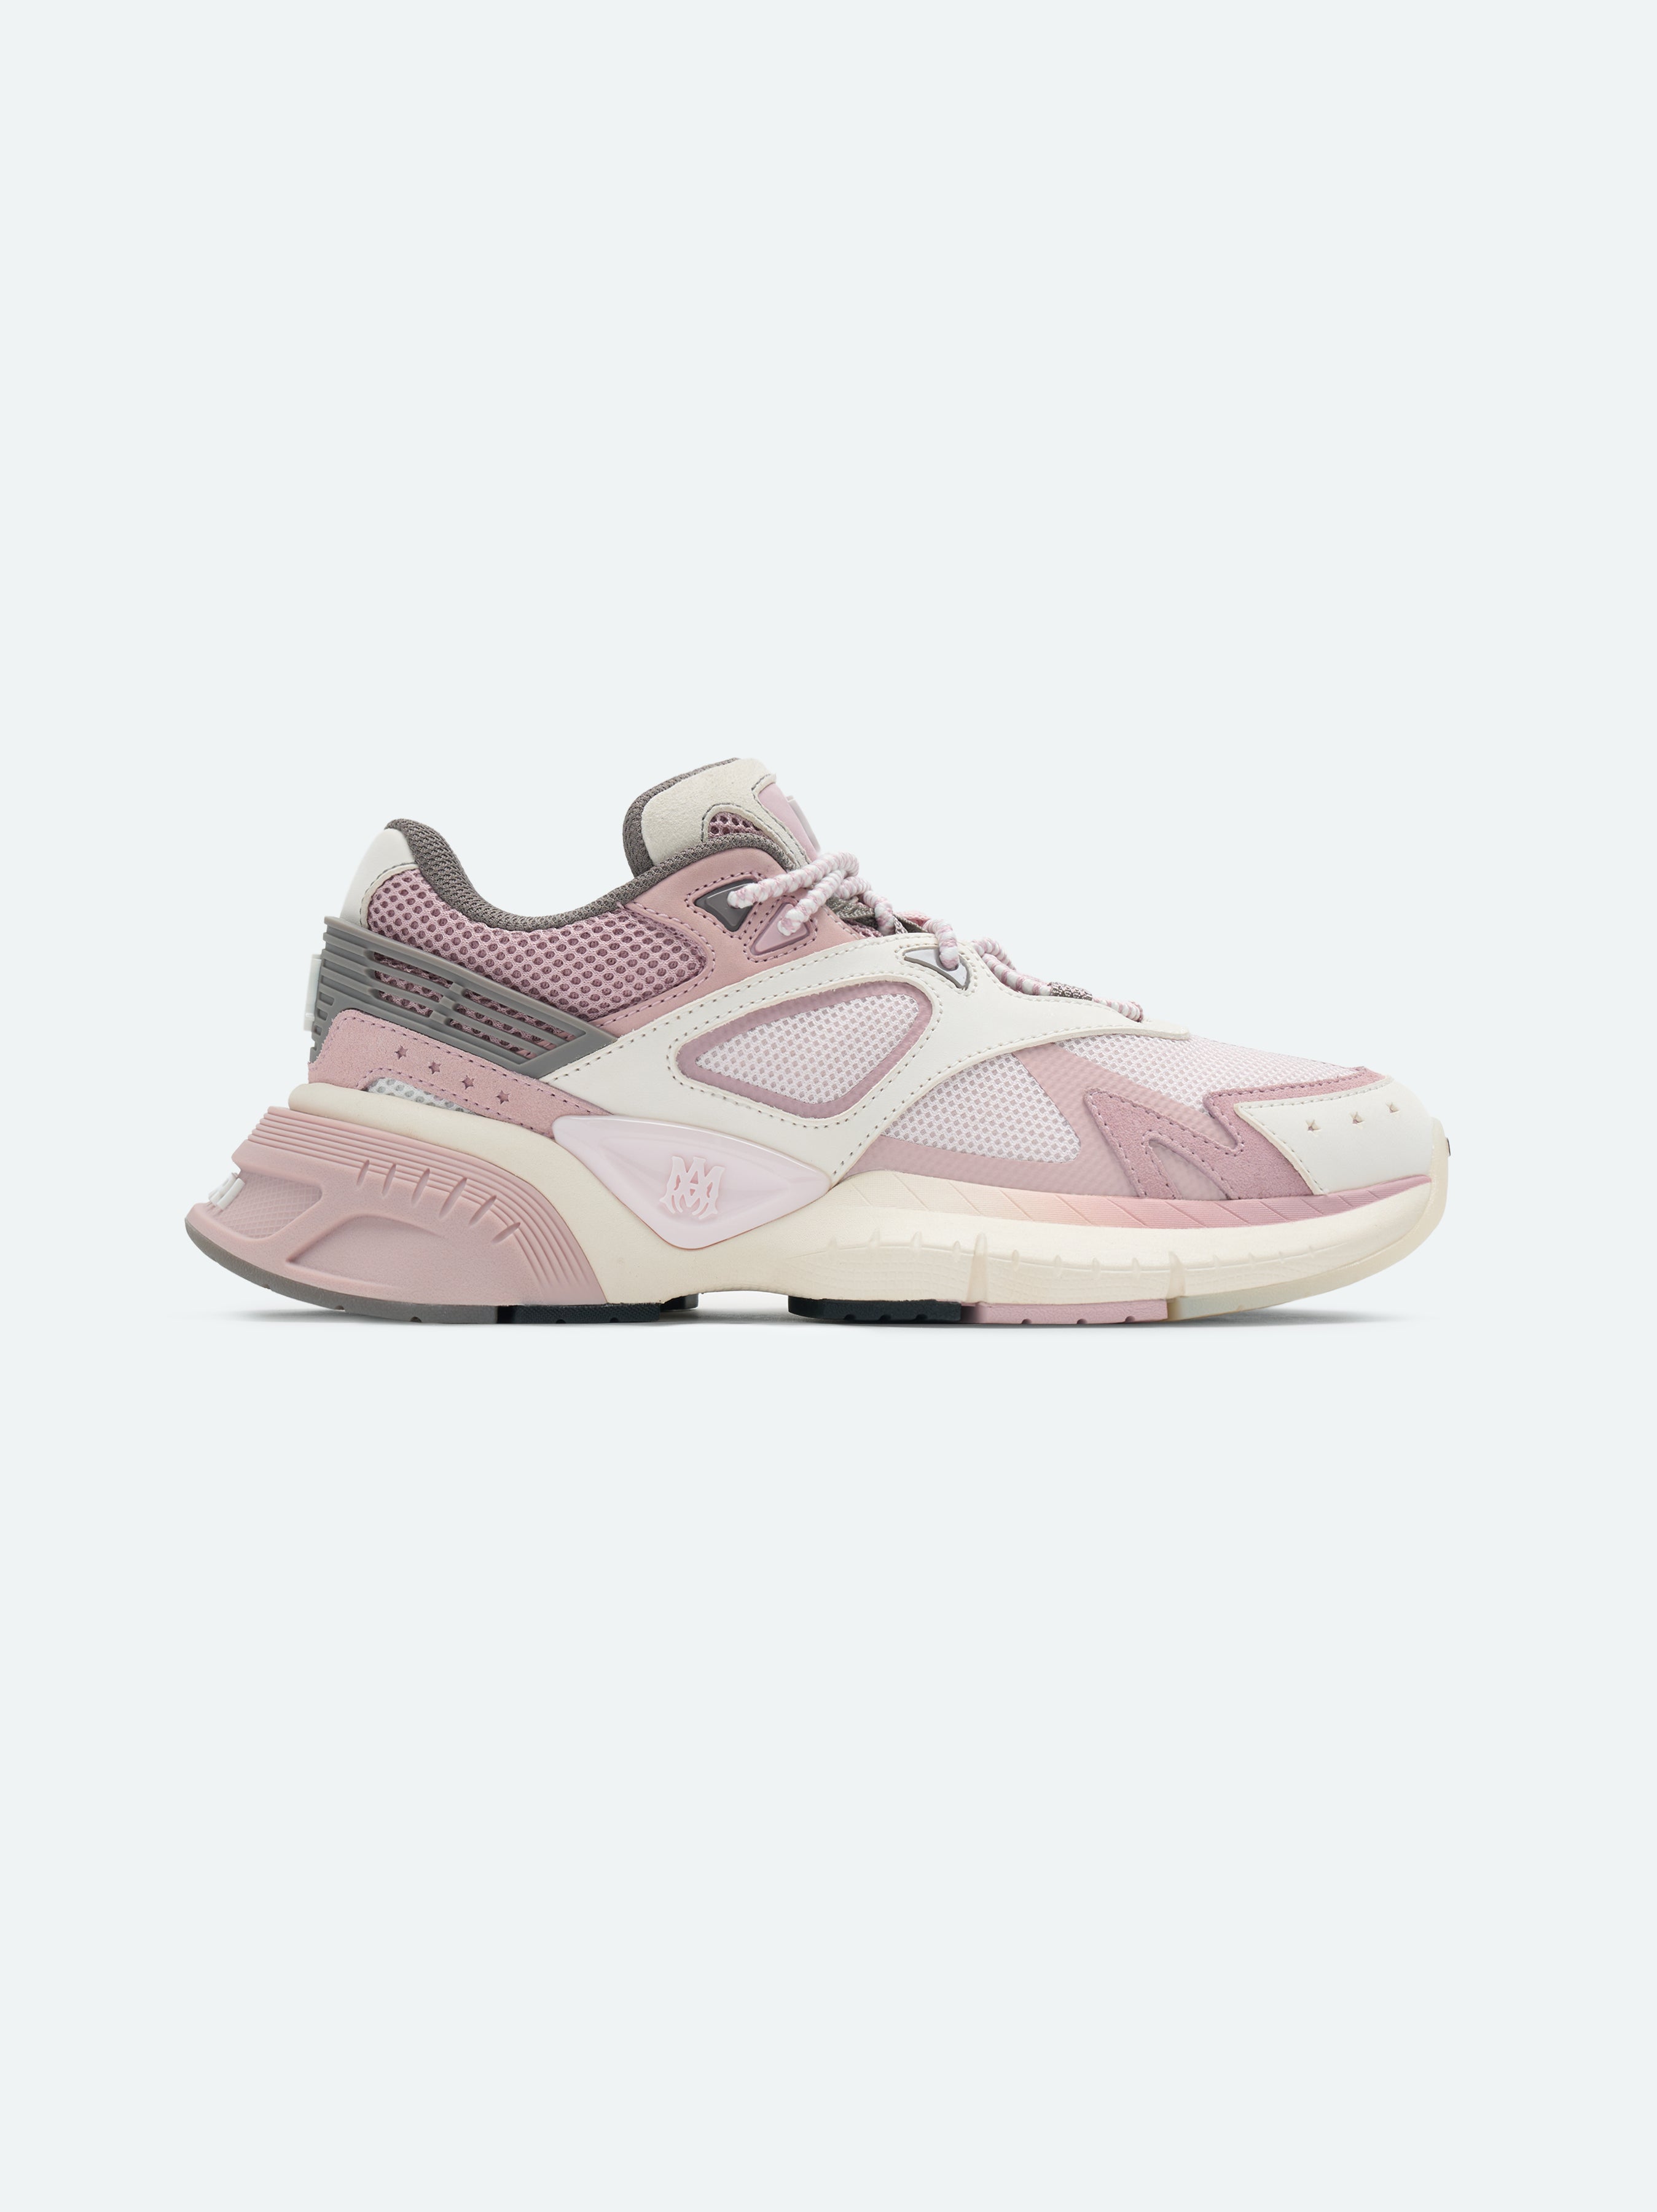 Product WOMEN - WOMEN'S MA RUNNER - Pink featured image